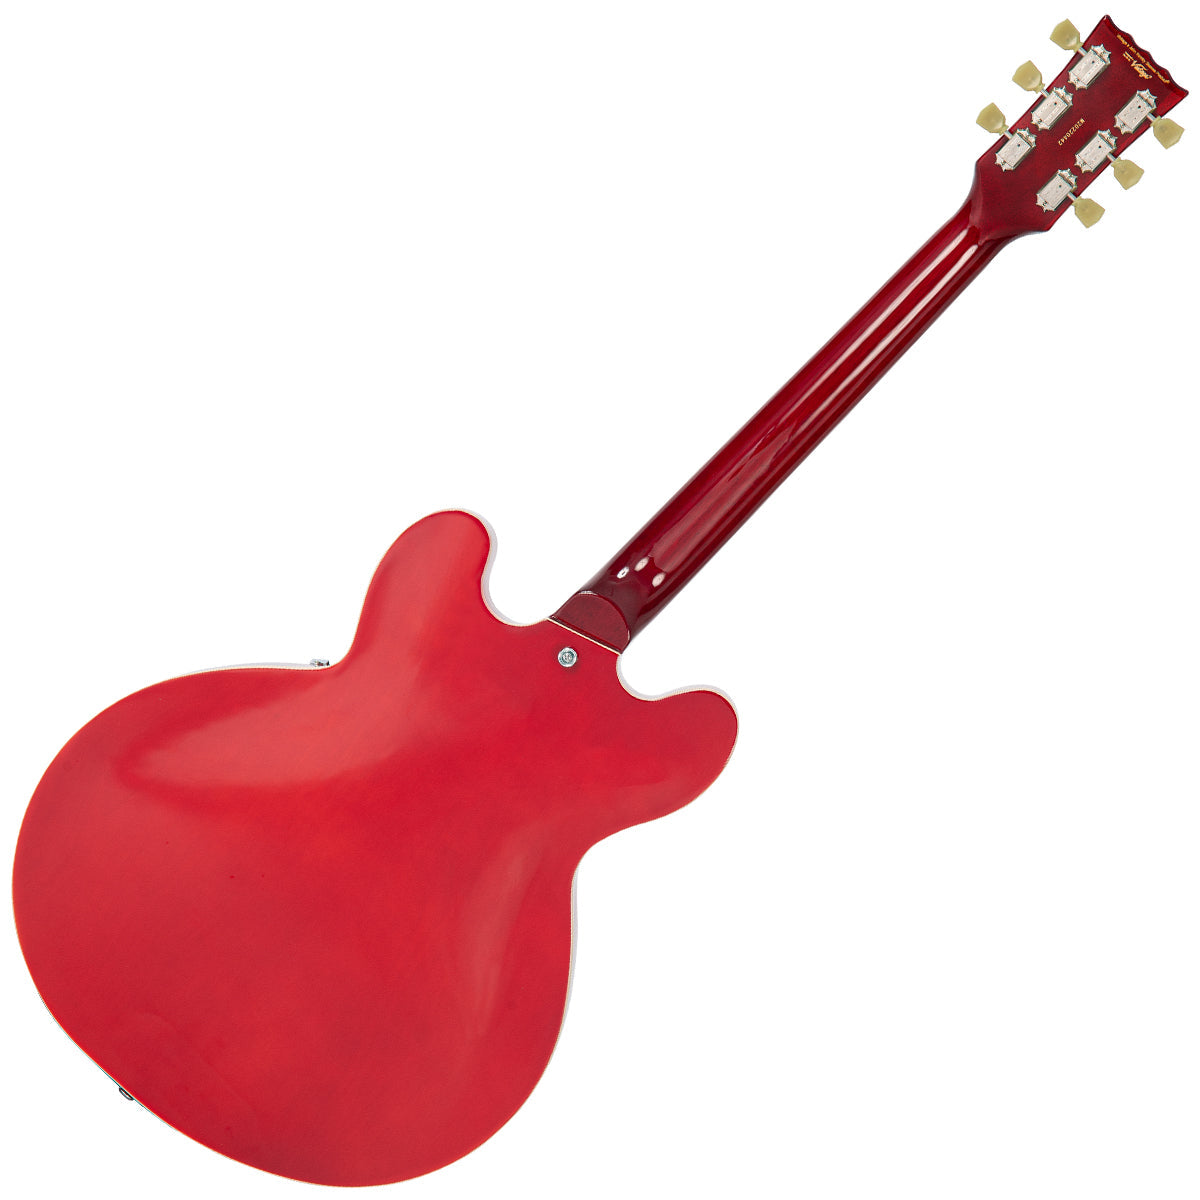 Vintage VSA500P ReIssued Semi Acoustic Guitar ~ Cherry Red, Semi-Acoustic Guitars for sale at Richards Guitars.